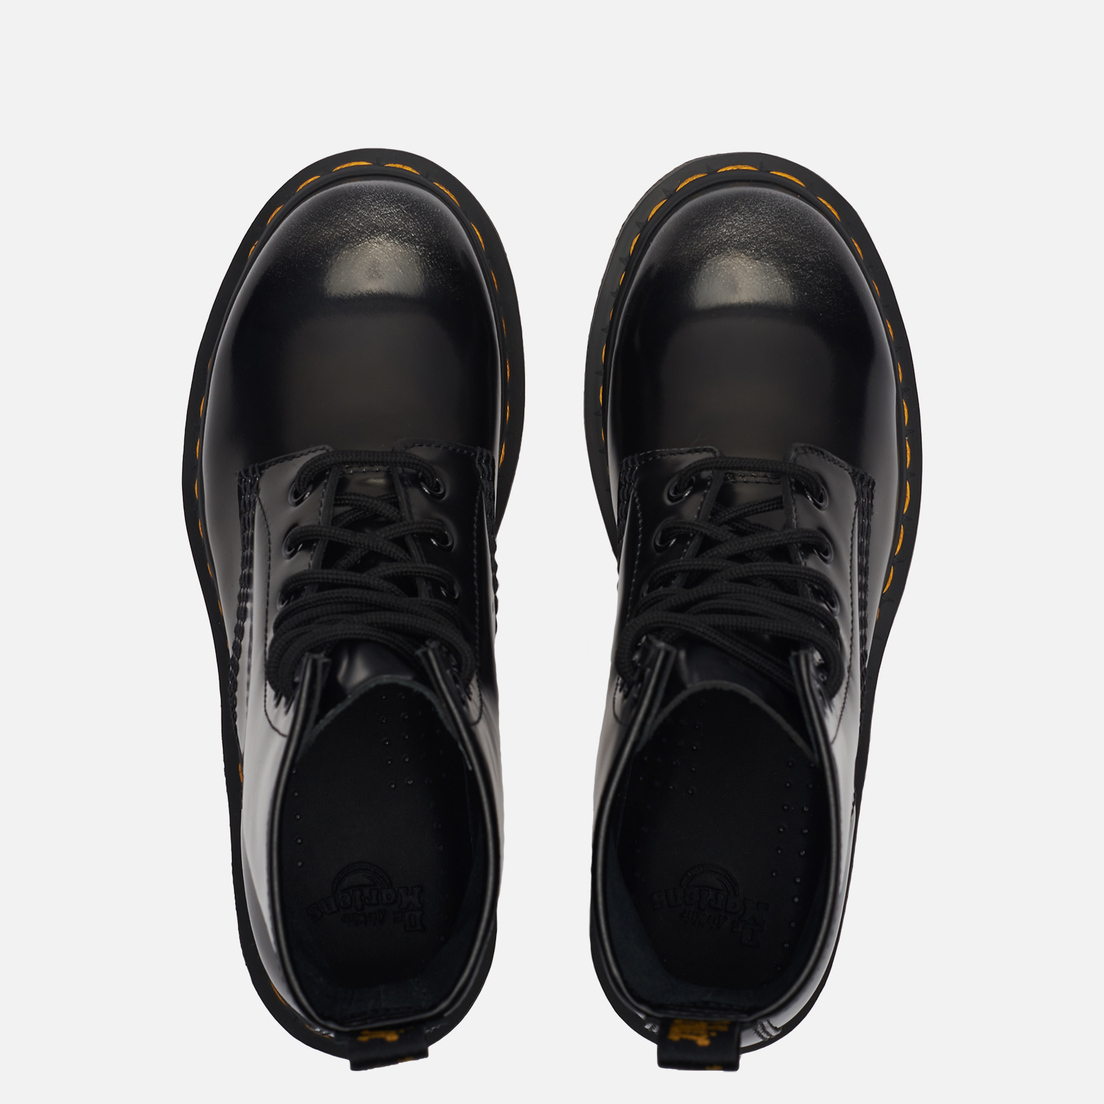 Dr. Martens Женские ботинки 1460 Arcadia Leather Lace Up